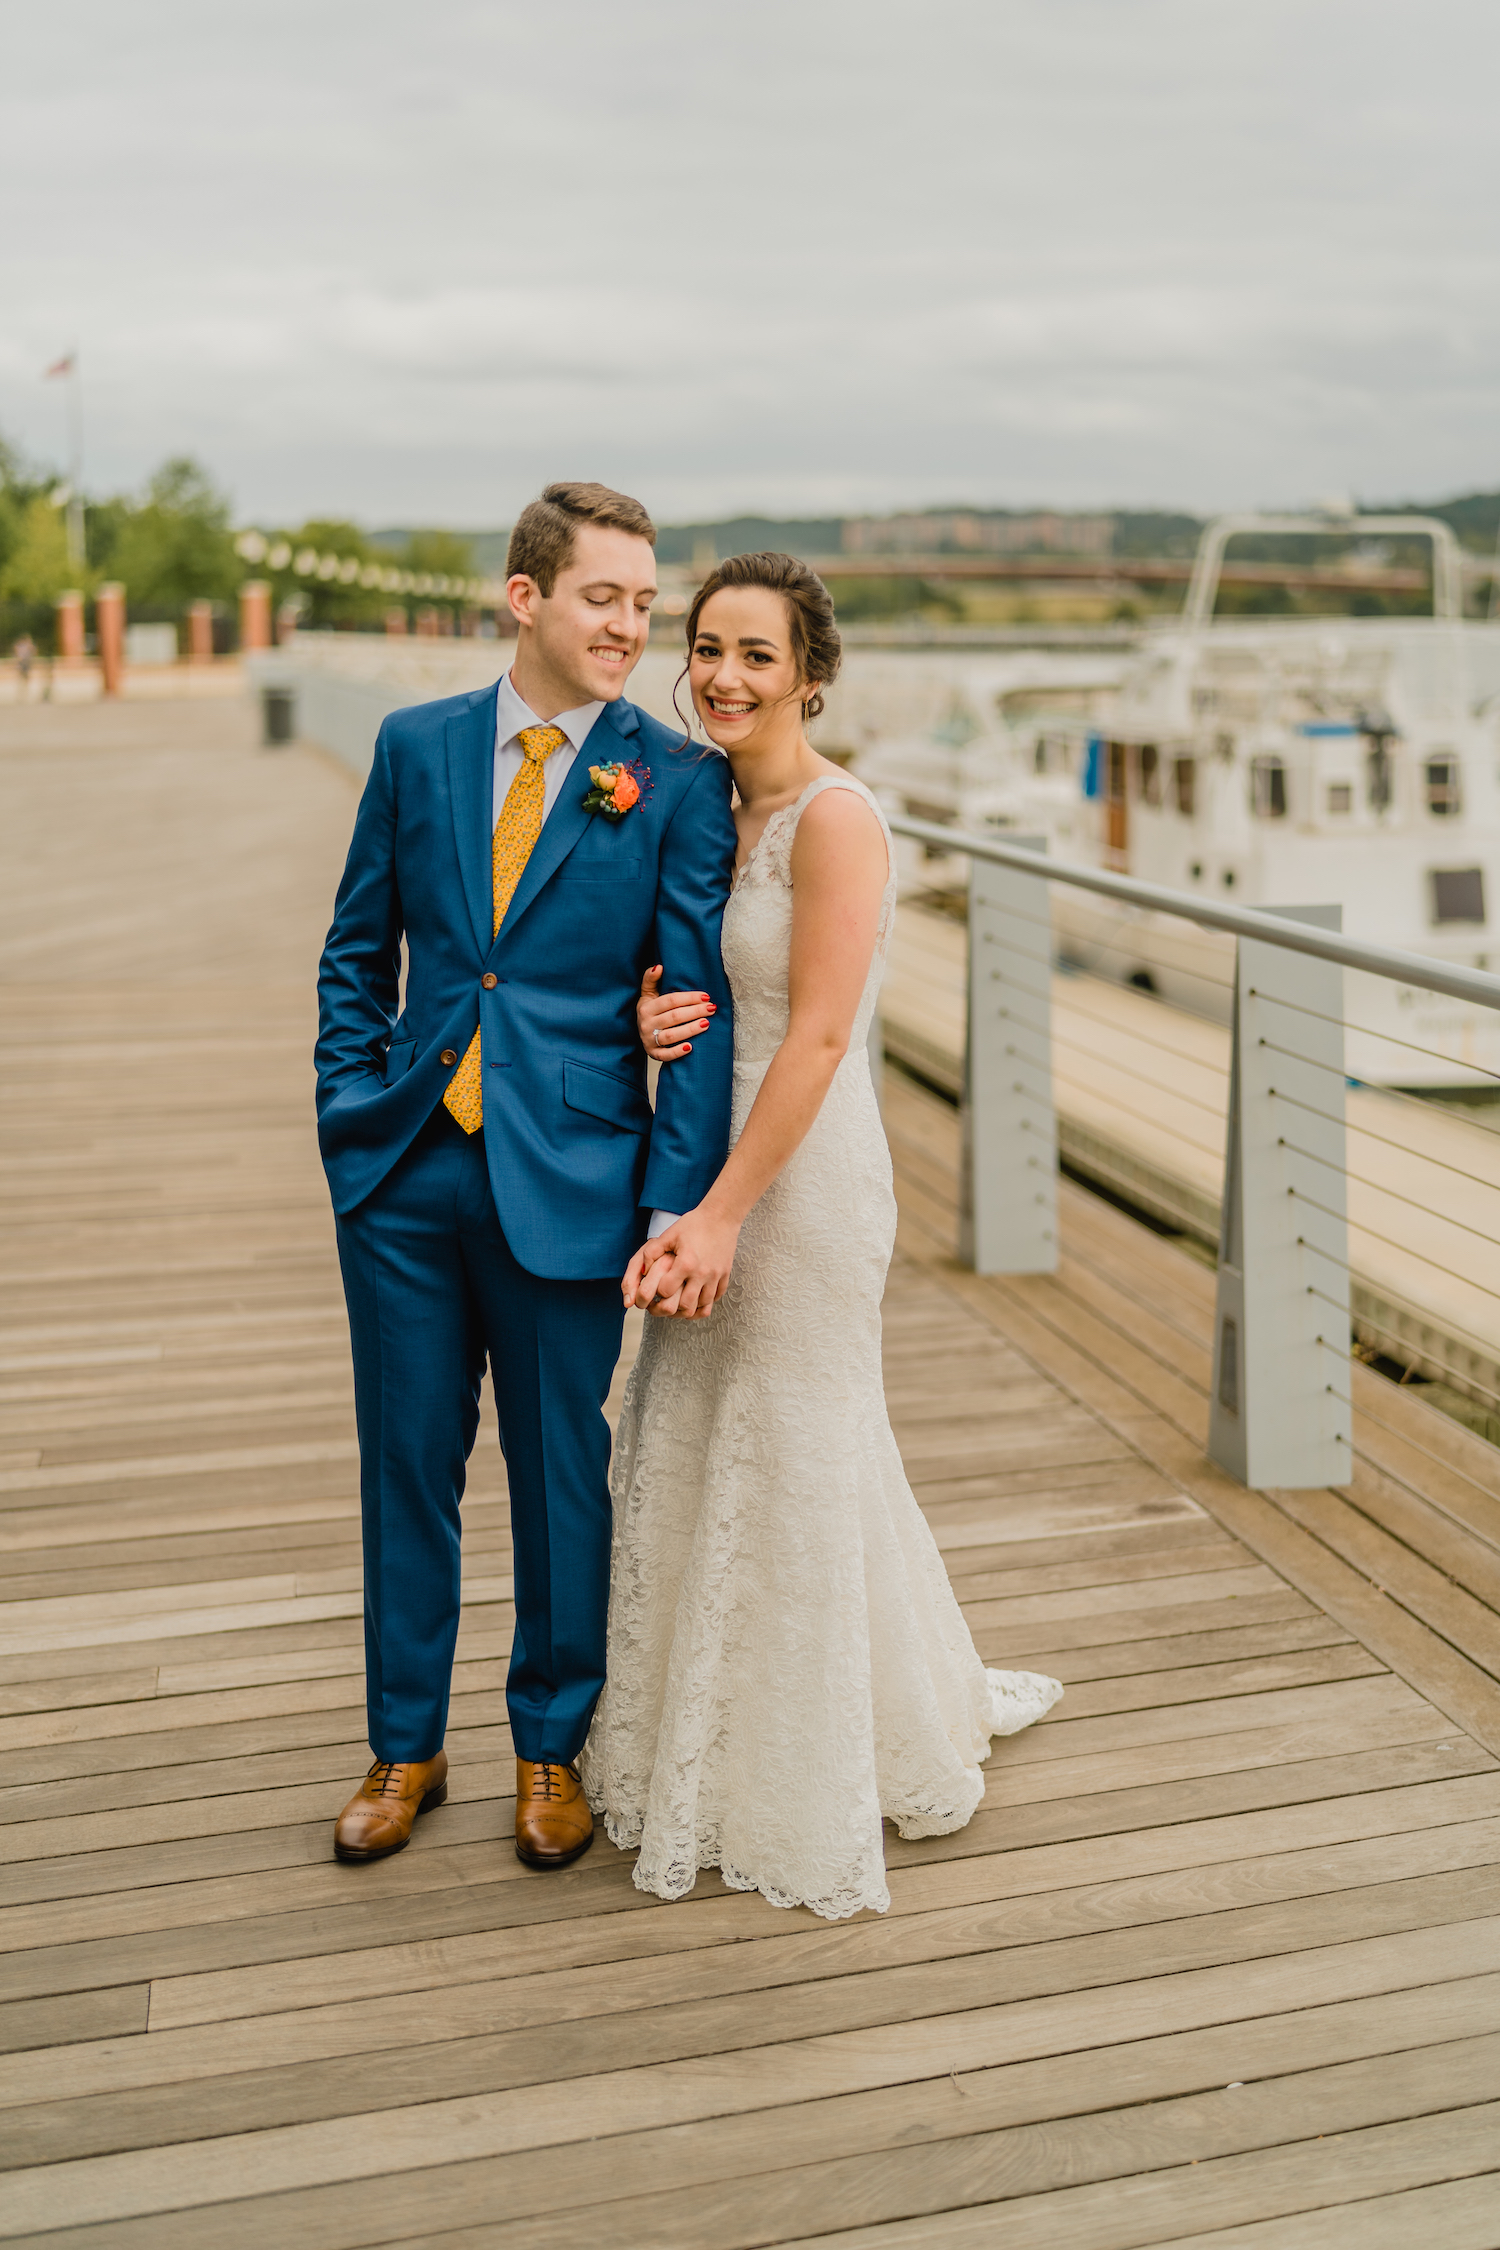 Bright and Cheerful Relaxed Romantic DC Wedding